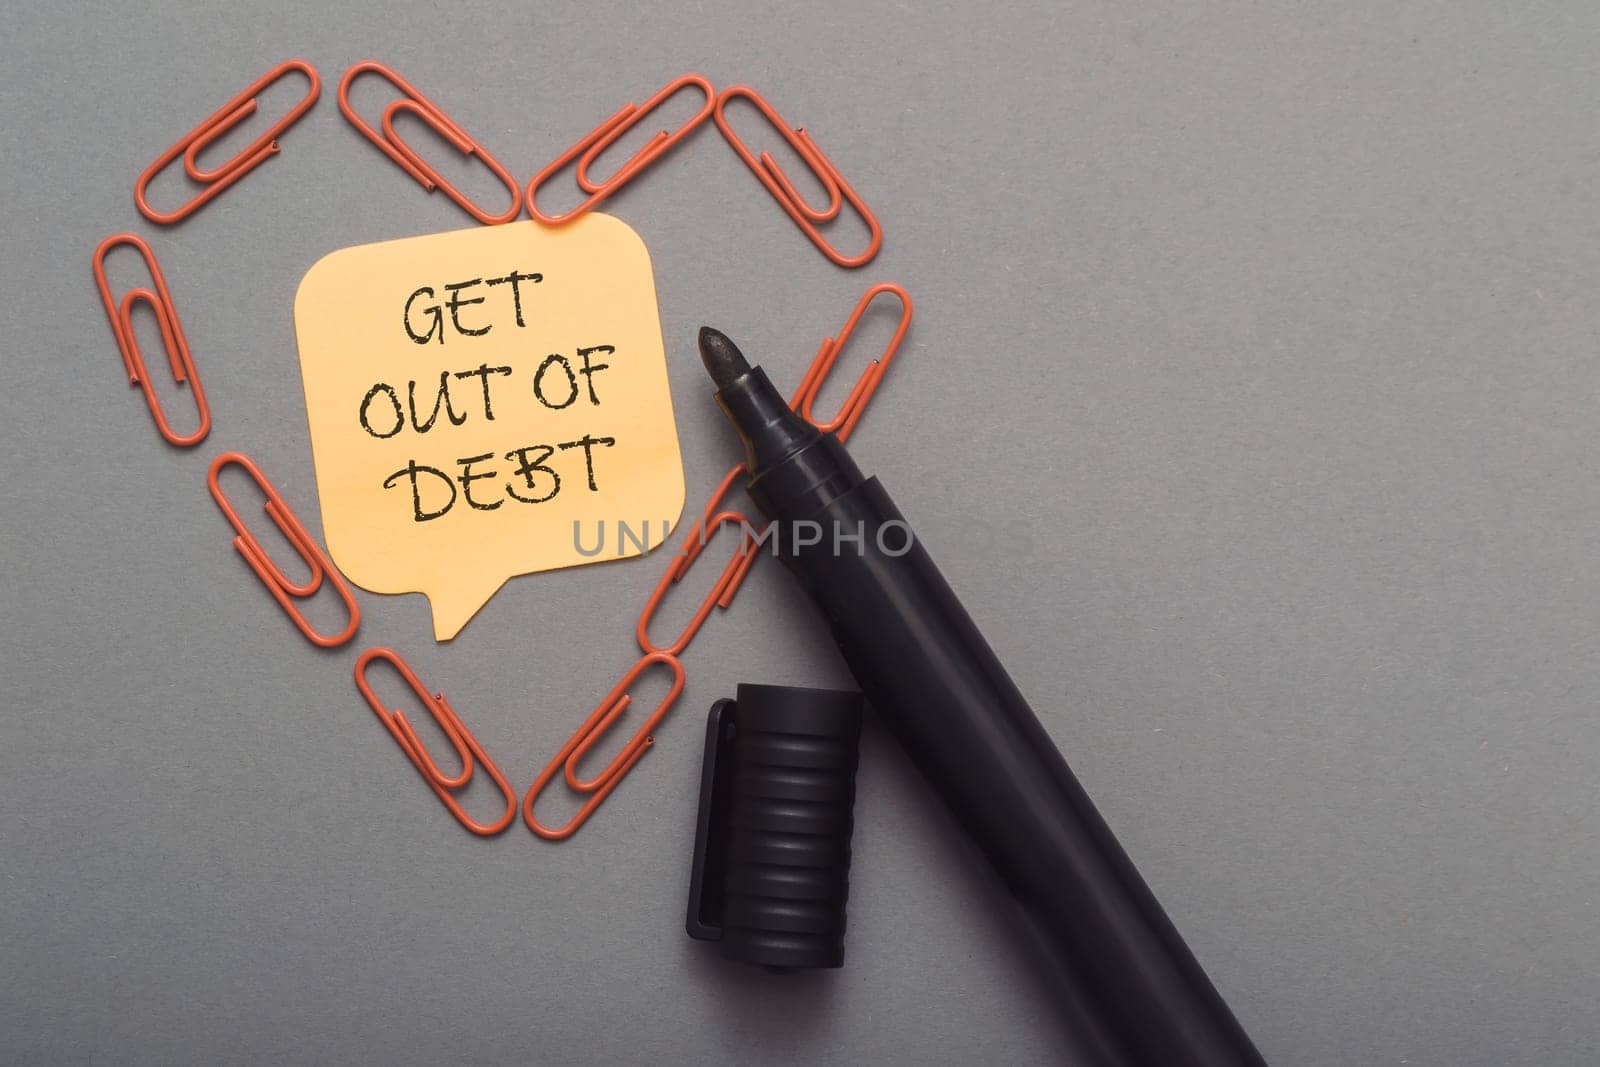 A pen with a note on it that says Get out of debt. The note is surrounded by paper clips, creating a heart shape. Concept of overcoming financial struggles and taking control of one's finances